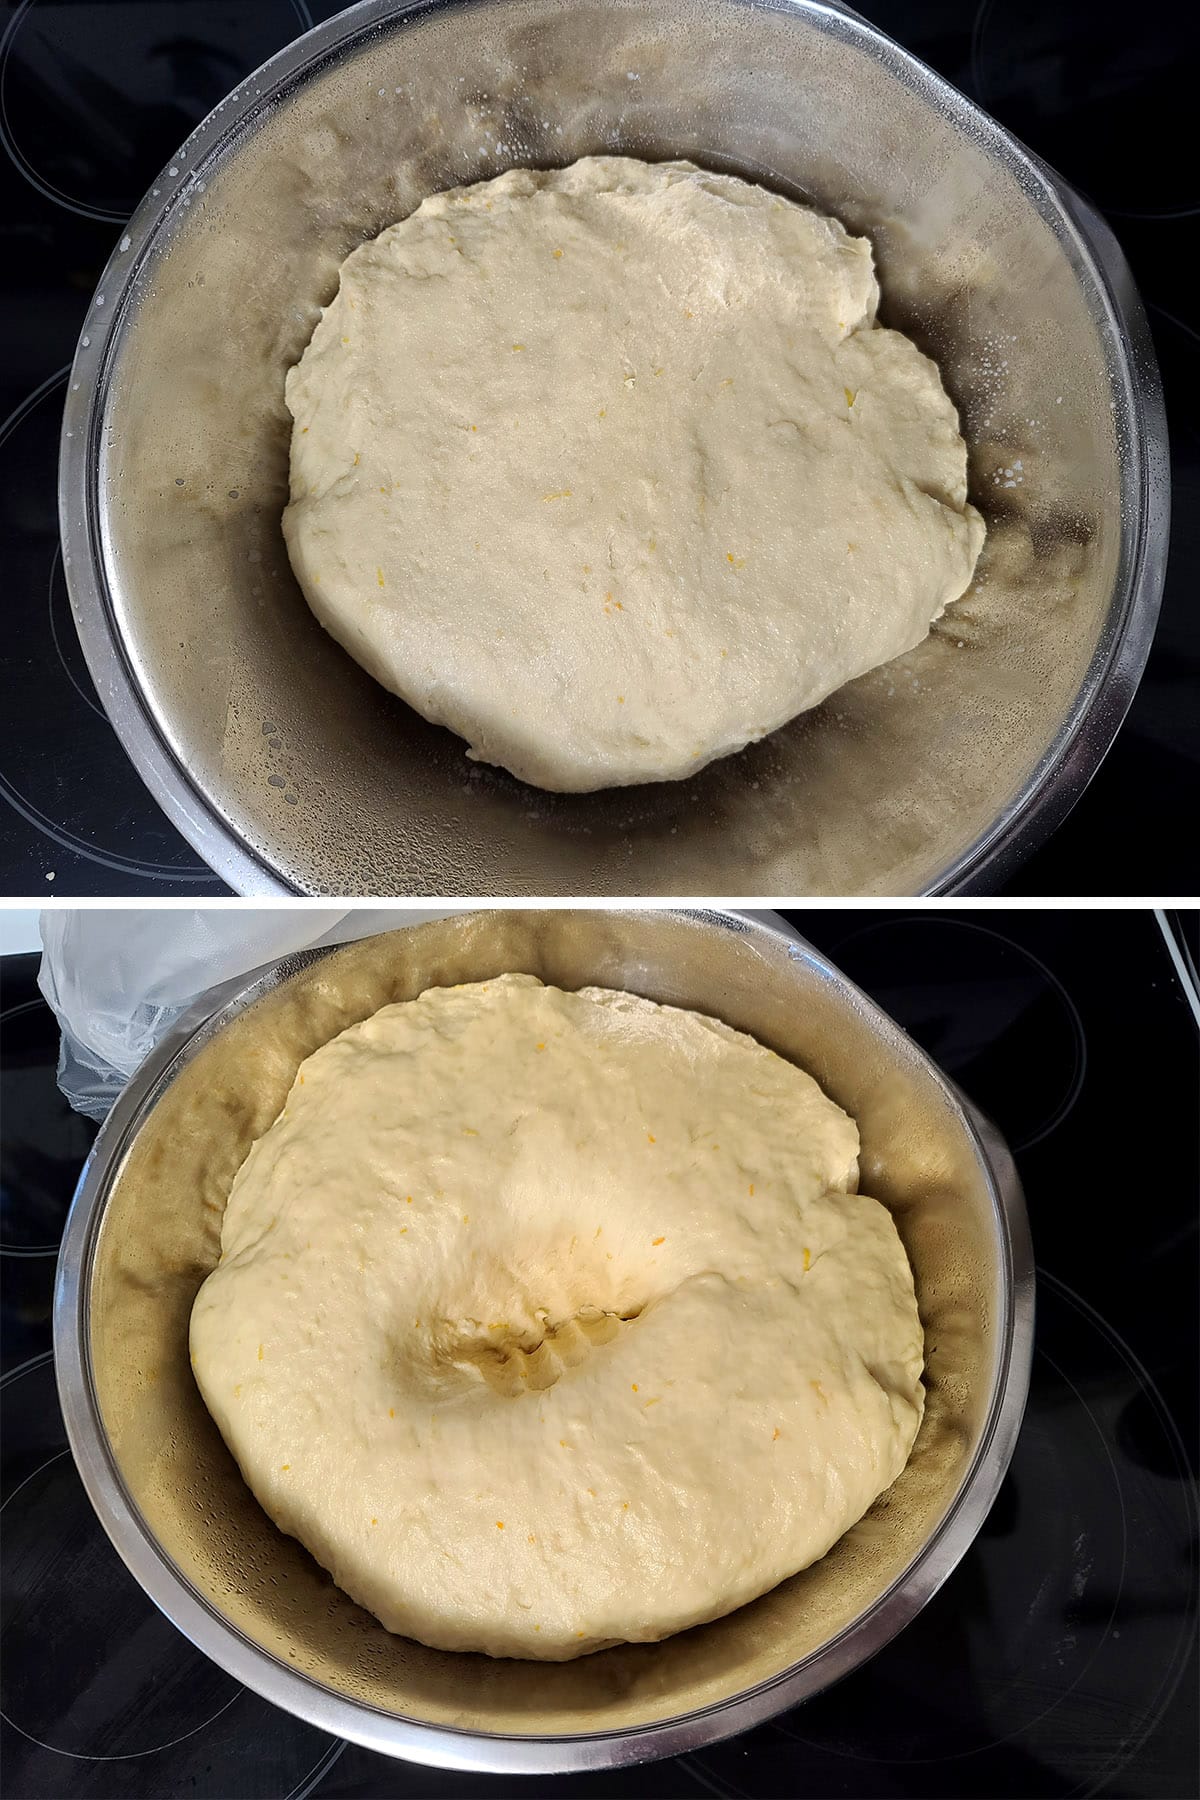 A 2 part image showing the risen dough before and after being punched down in a large metal bowl.